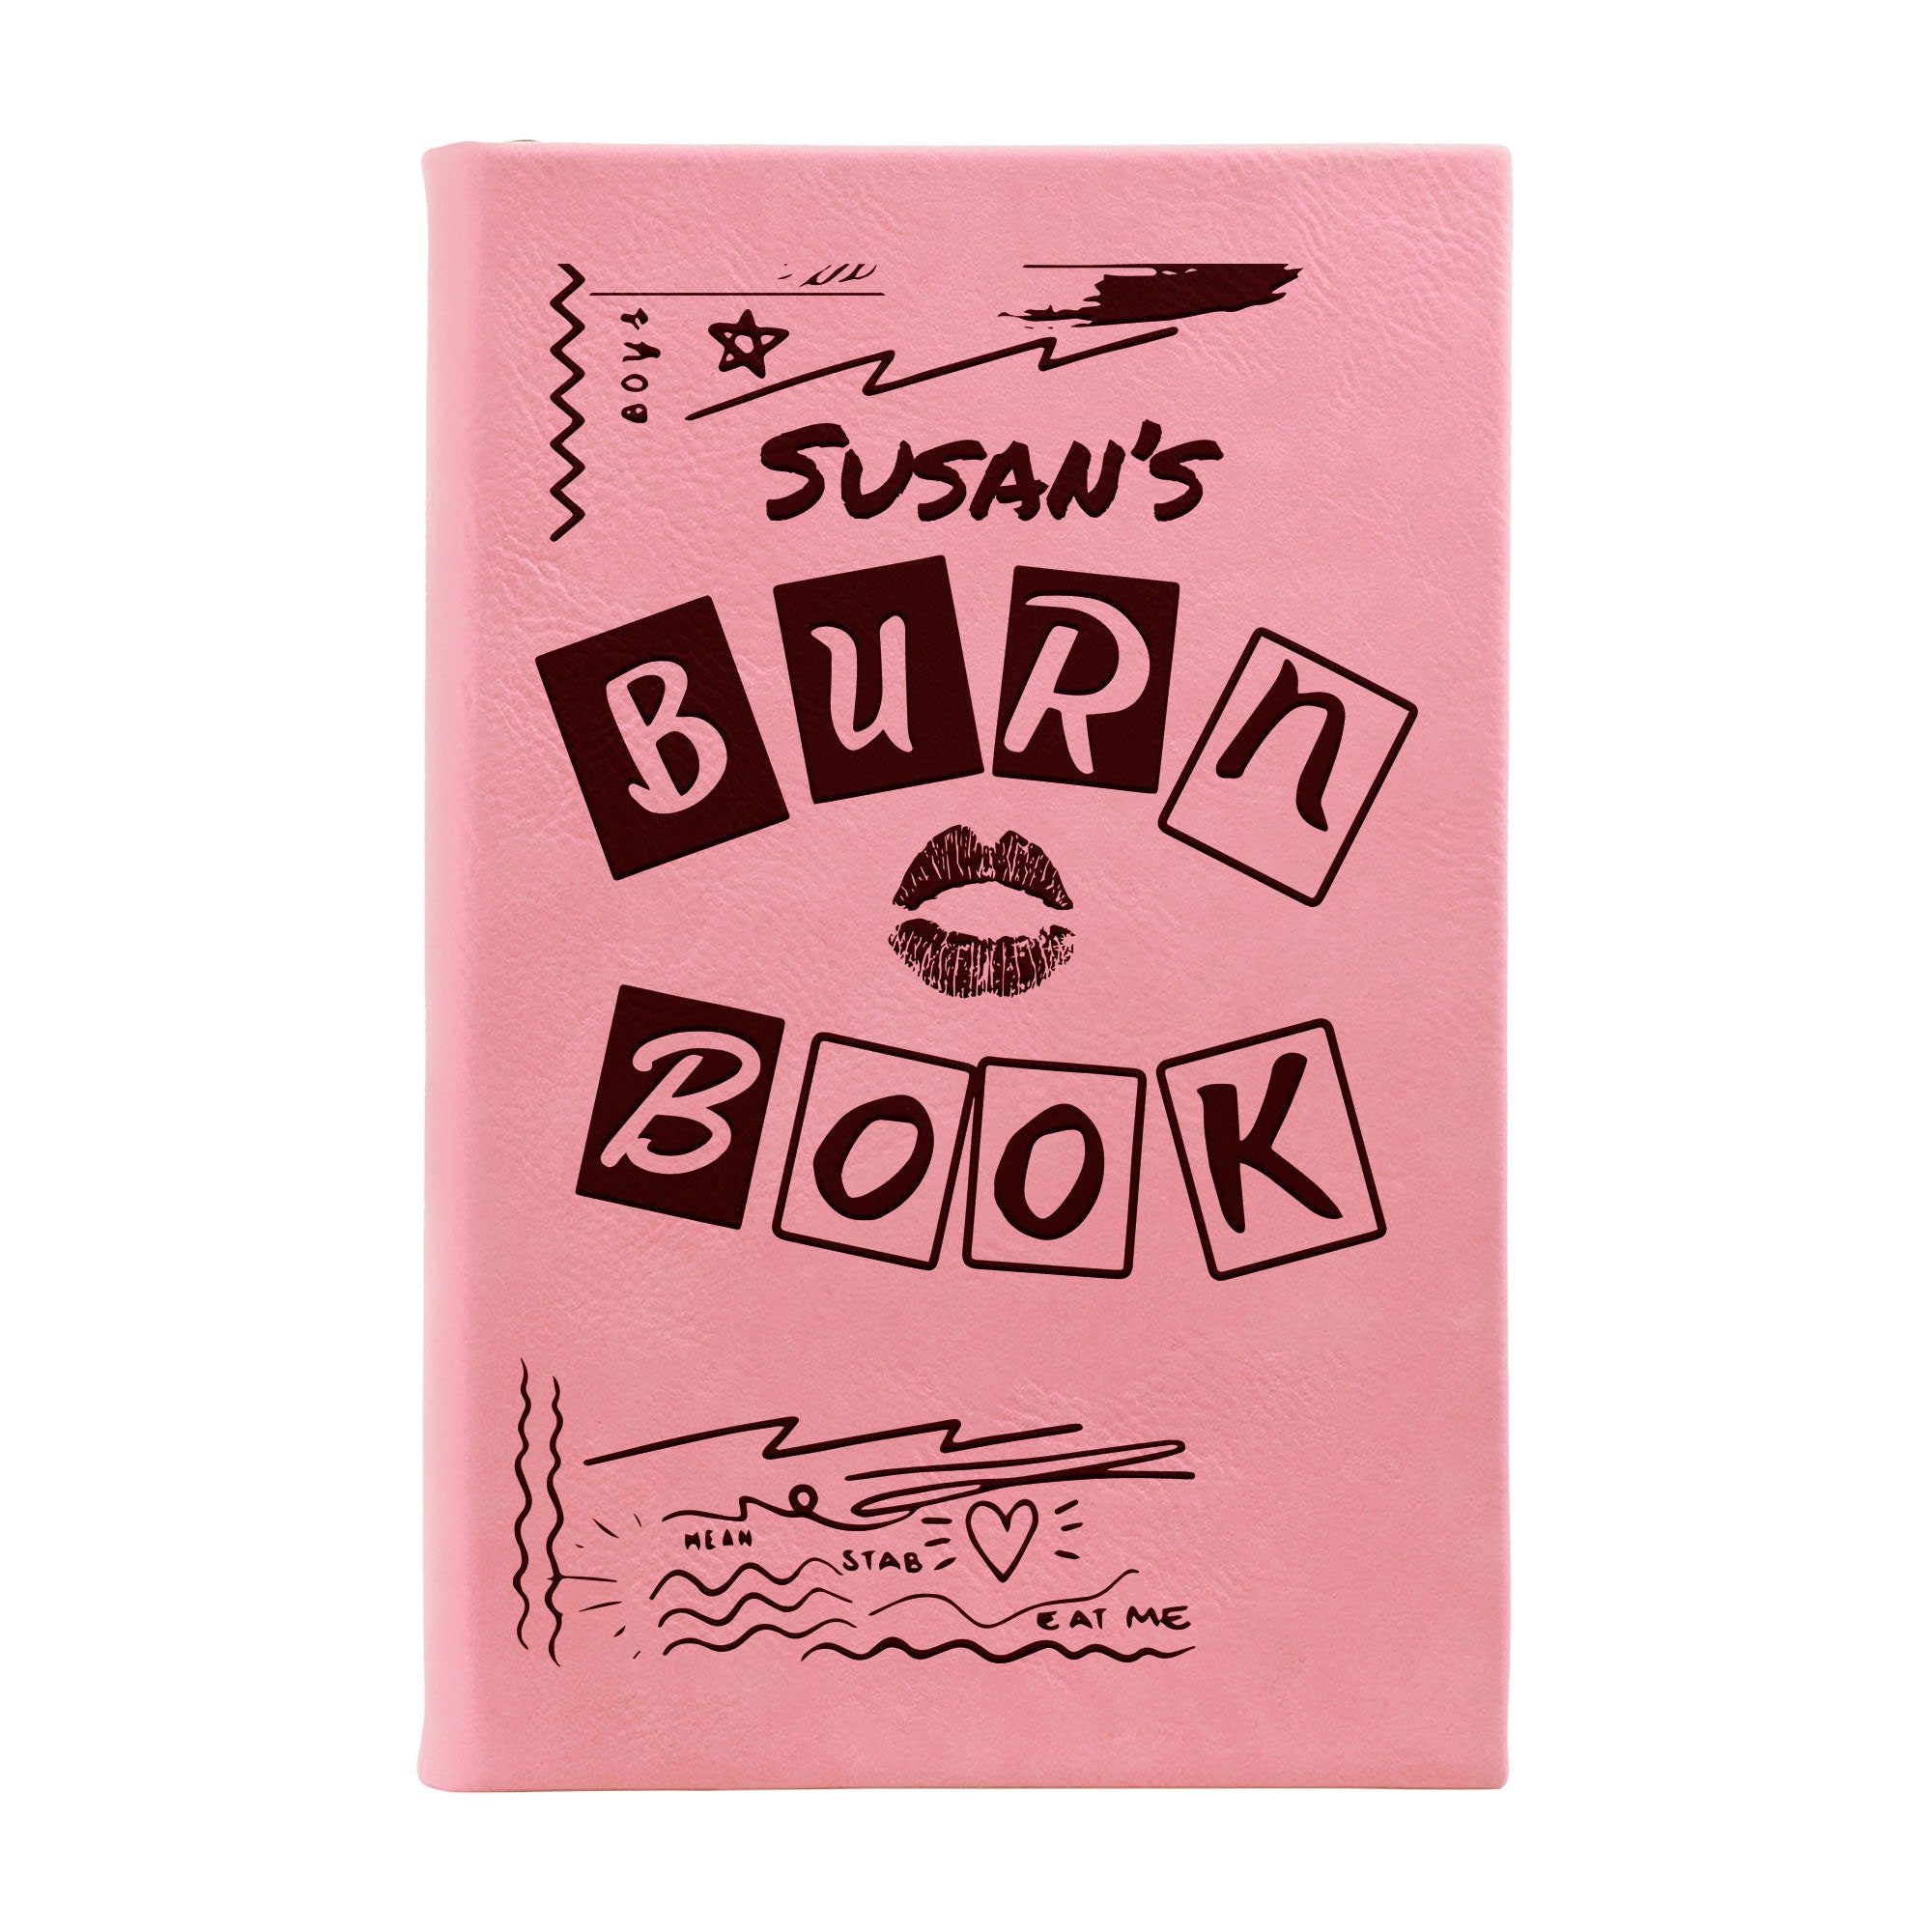 Mean Girls Burn Book, Hardcover Journal, 75 Lined Pages, 8.07x5.71